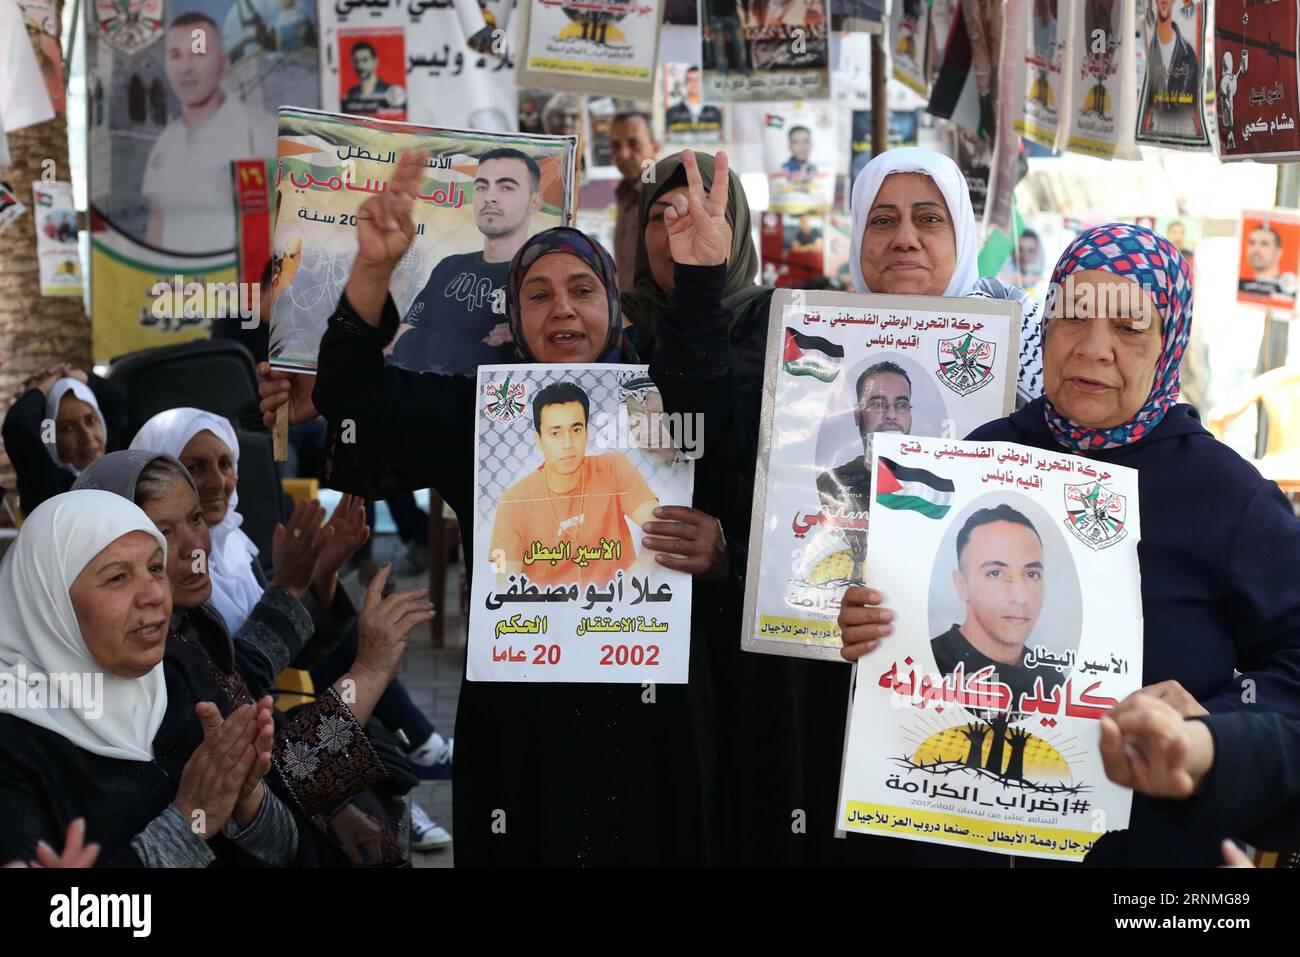 (170527) -- NABLUS, May 27, 2017 -- Palestinian women hold pictures of their jailed families, as they celebrate during a protest in solidarity with prisoners in Israeli jails, in the West Bank City of Nablus, on May 27, 2017. Palestinian Fatah Party Recruitment Commissioner Jamal Muheisen declared that over 1,500 Palestinian prisoners in Israeli jails have suspended their hunger strike after a deal with the Israeli Prisons Authority. )(yk) MIDEAST-NABLUS-PRISONERS AymanxNobani PUBLICATIONxNOTxINxCHN   Nablus May 27 2017 PALESTINIAN Women Hold Pictures of their jailed families As They Celebrate Stock Photo